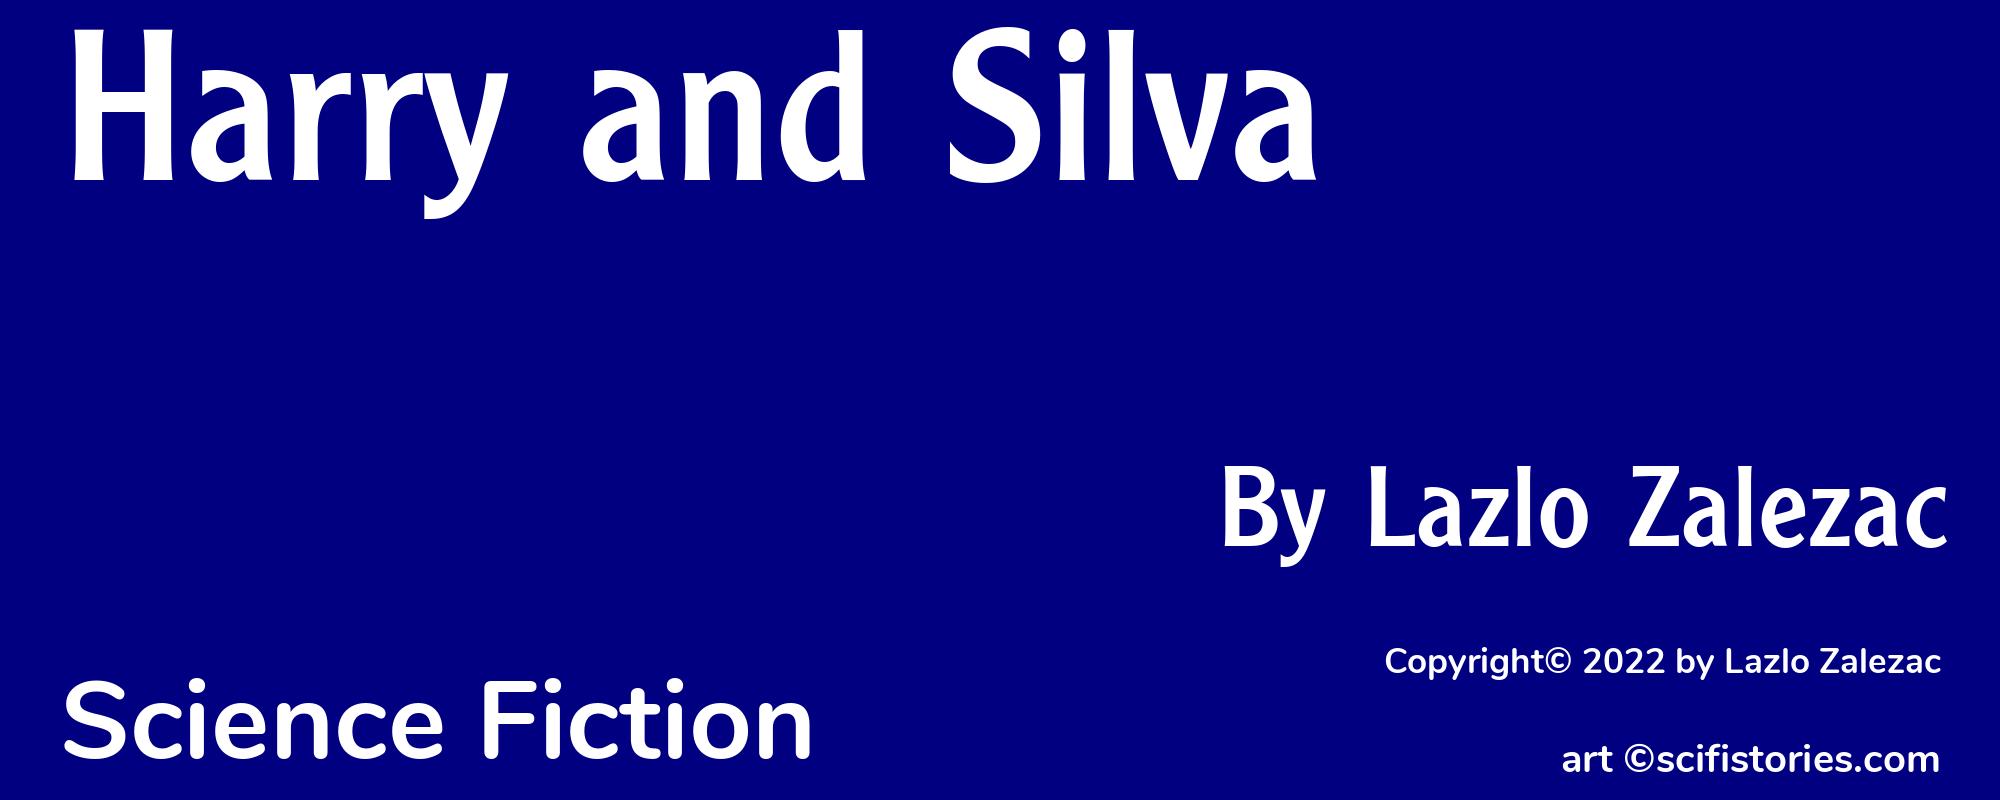 Harry and Silva - Cover